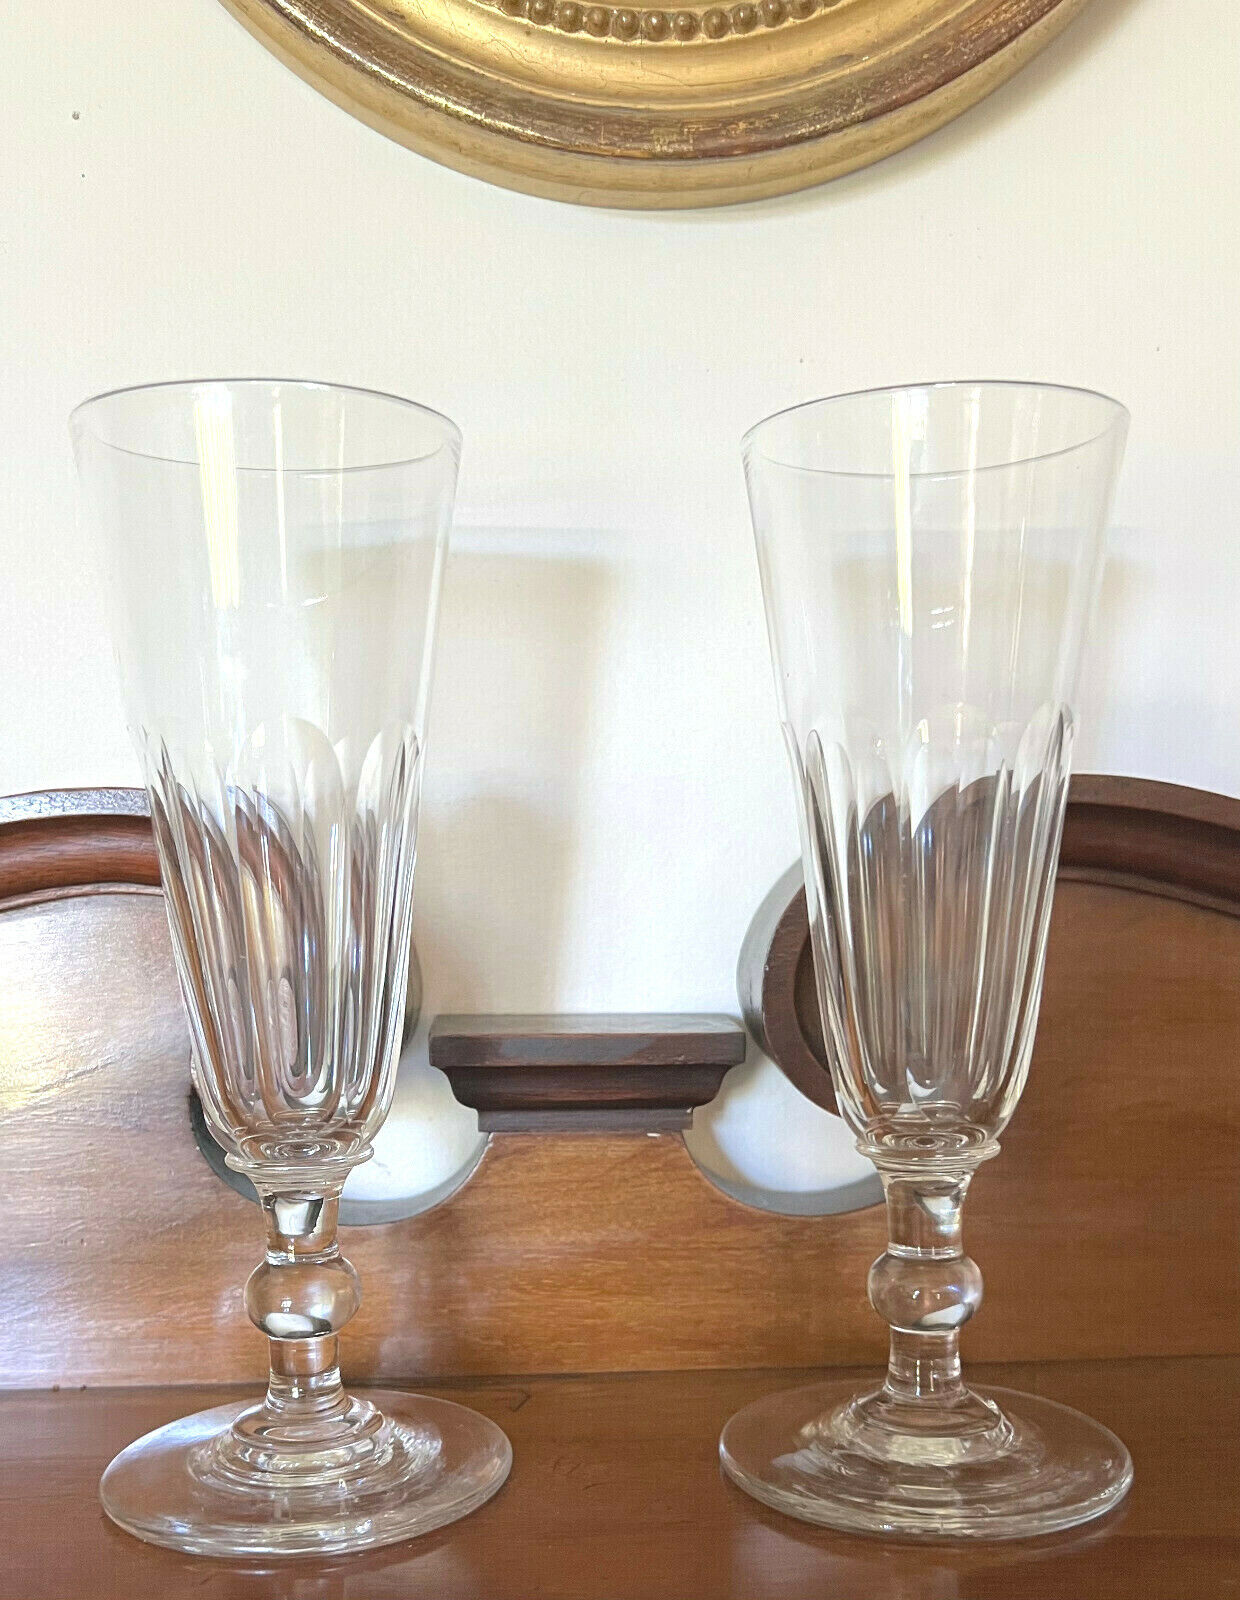 LATE VICTORIAN CRYSTAL FLUTE WINE GLASSES